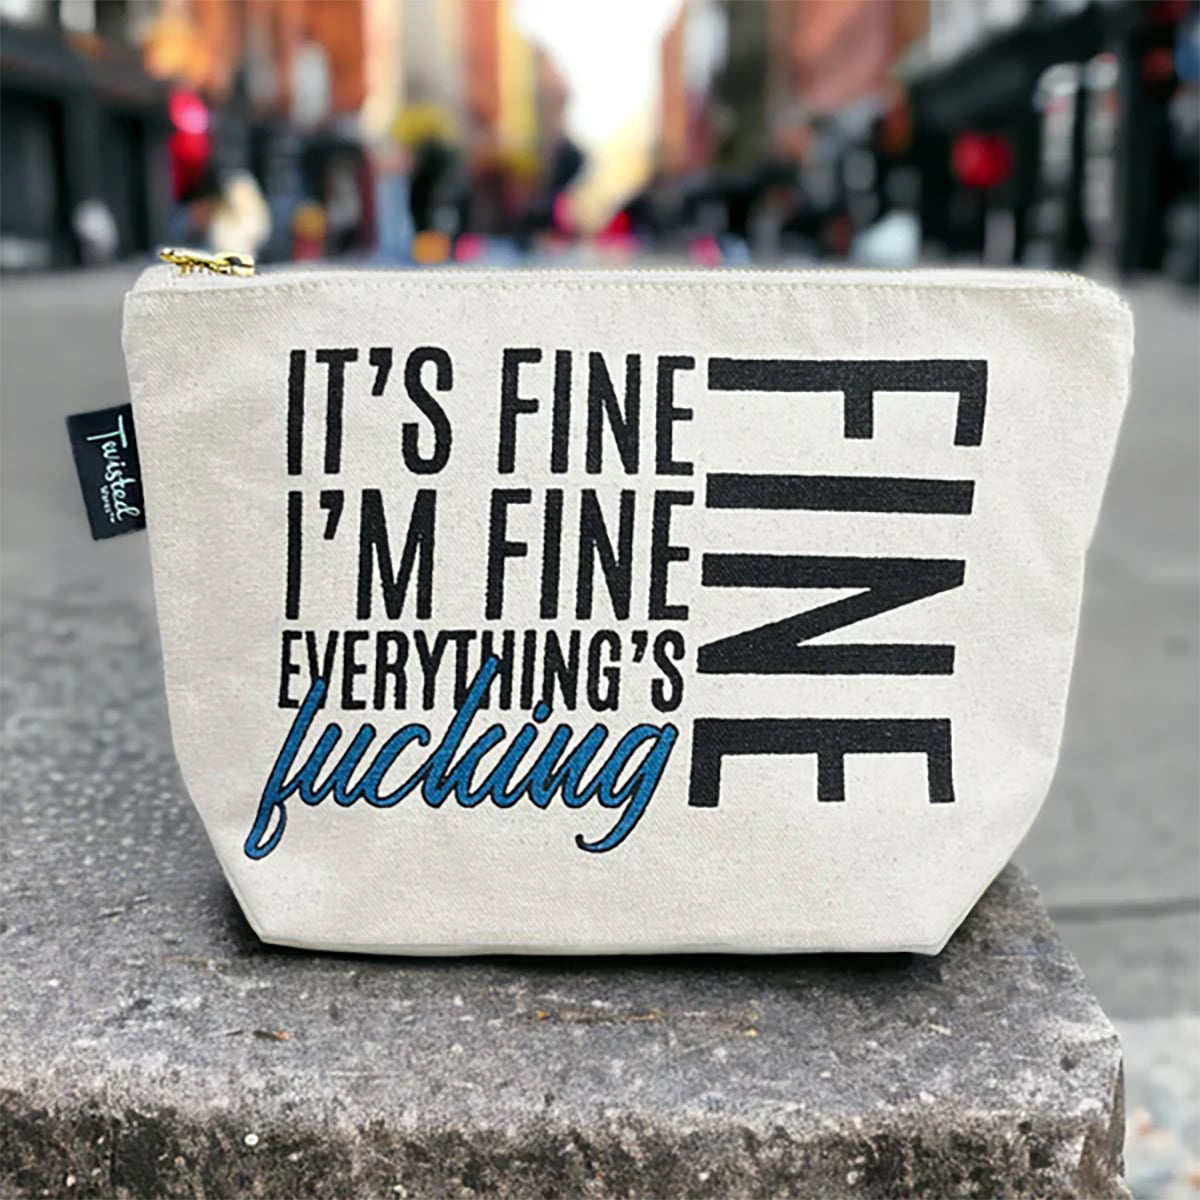 Twisted Wares It's Fine, I'm Fine, Everything's Fine Cosmetic Bag